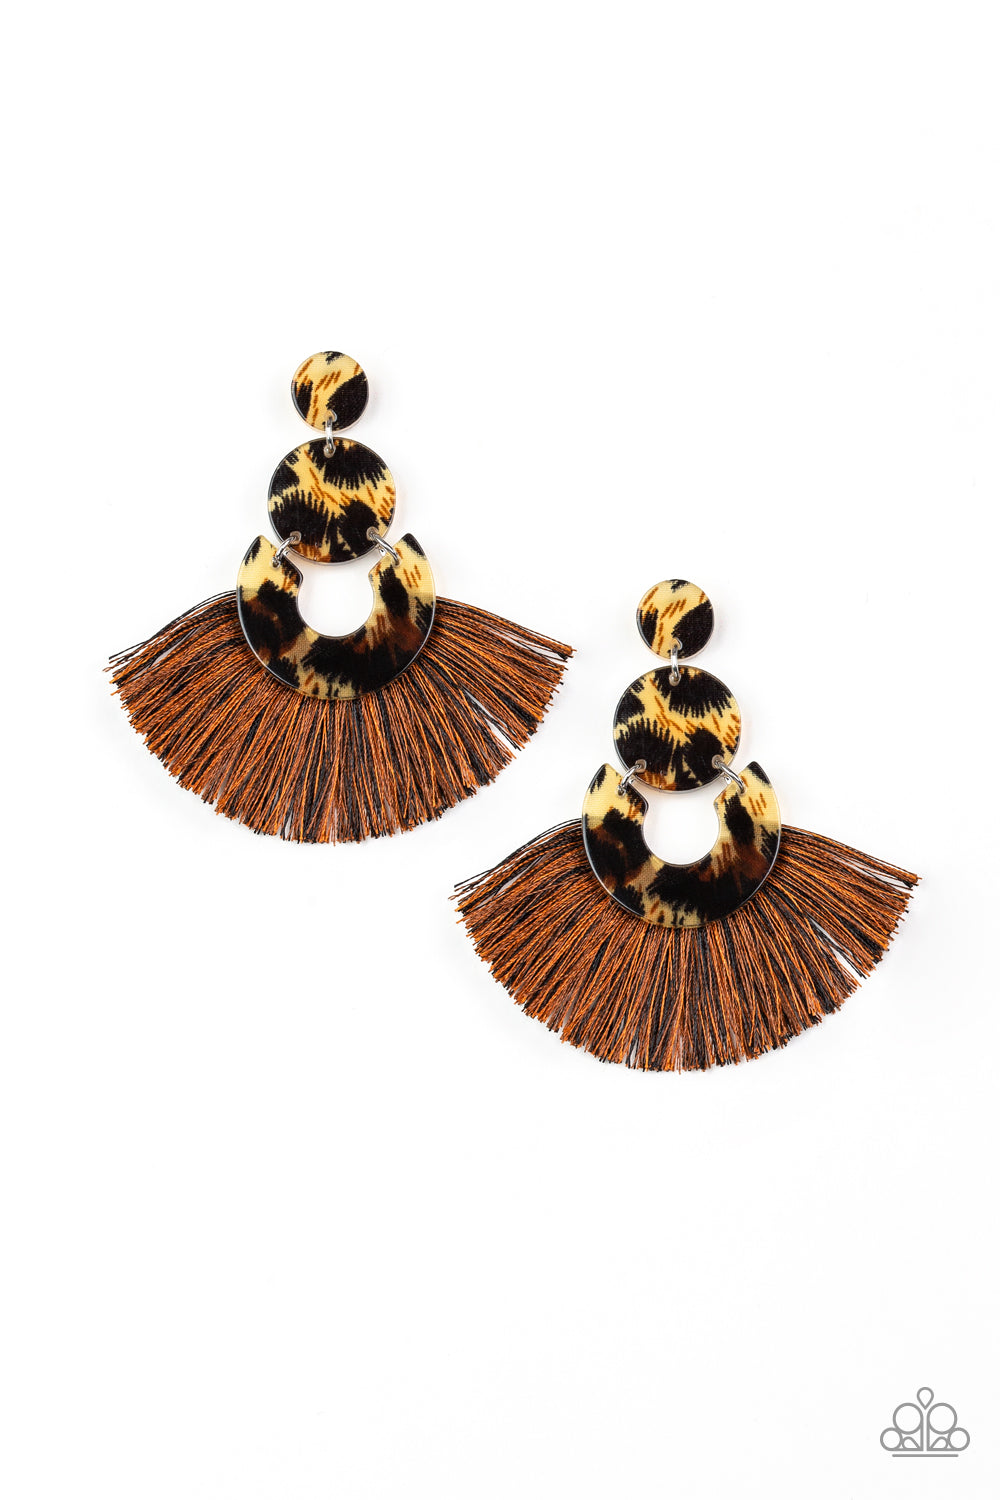 Paparazzi Accessories One Big Party Animal - Multi Earrings - Lady T Accessories